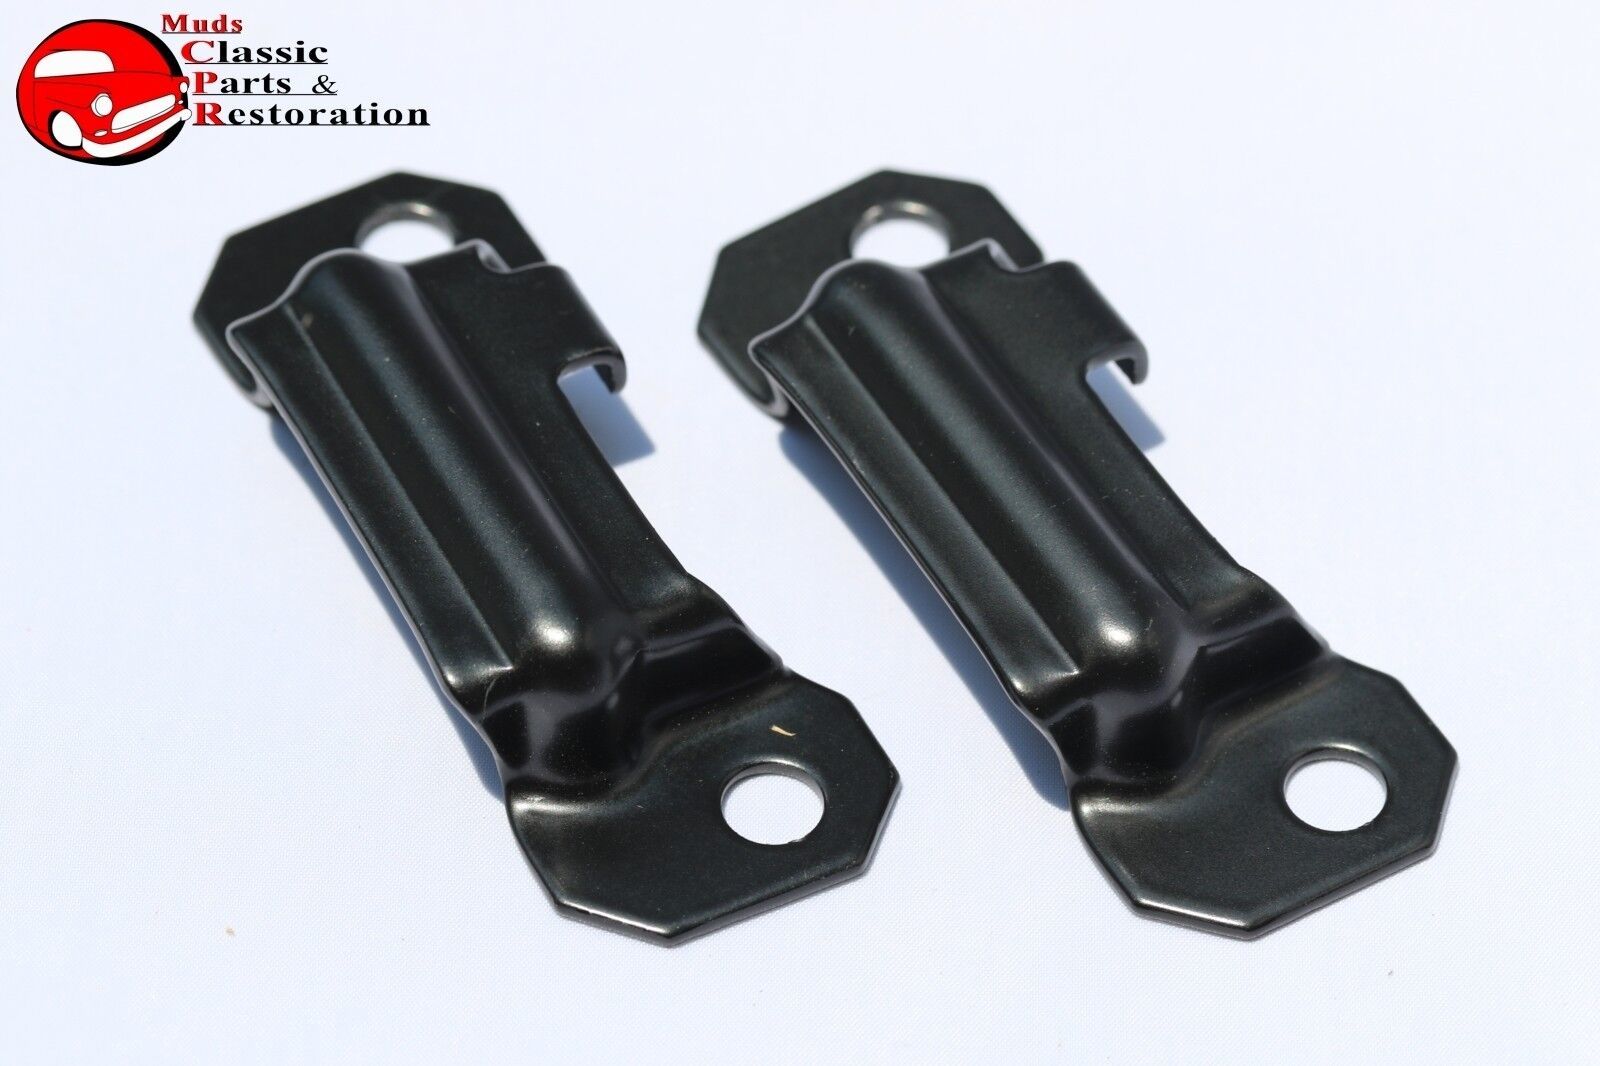 1955 1956 1957 Chevy Passenger Car Bench Seat To Floor Clip Pair Bel Air 150 210 - $21.18